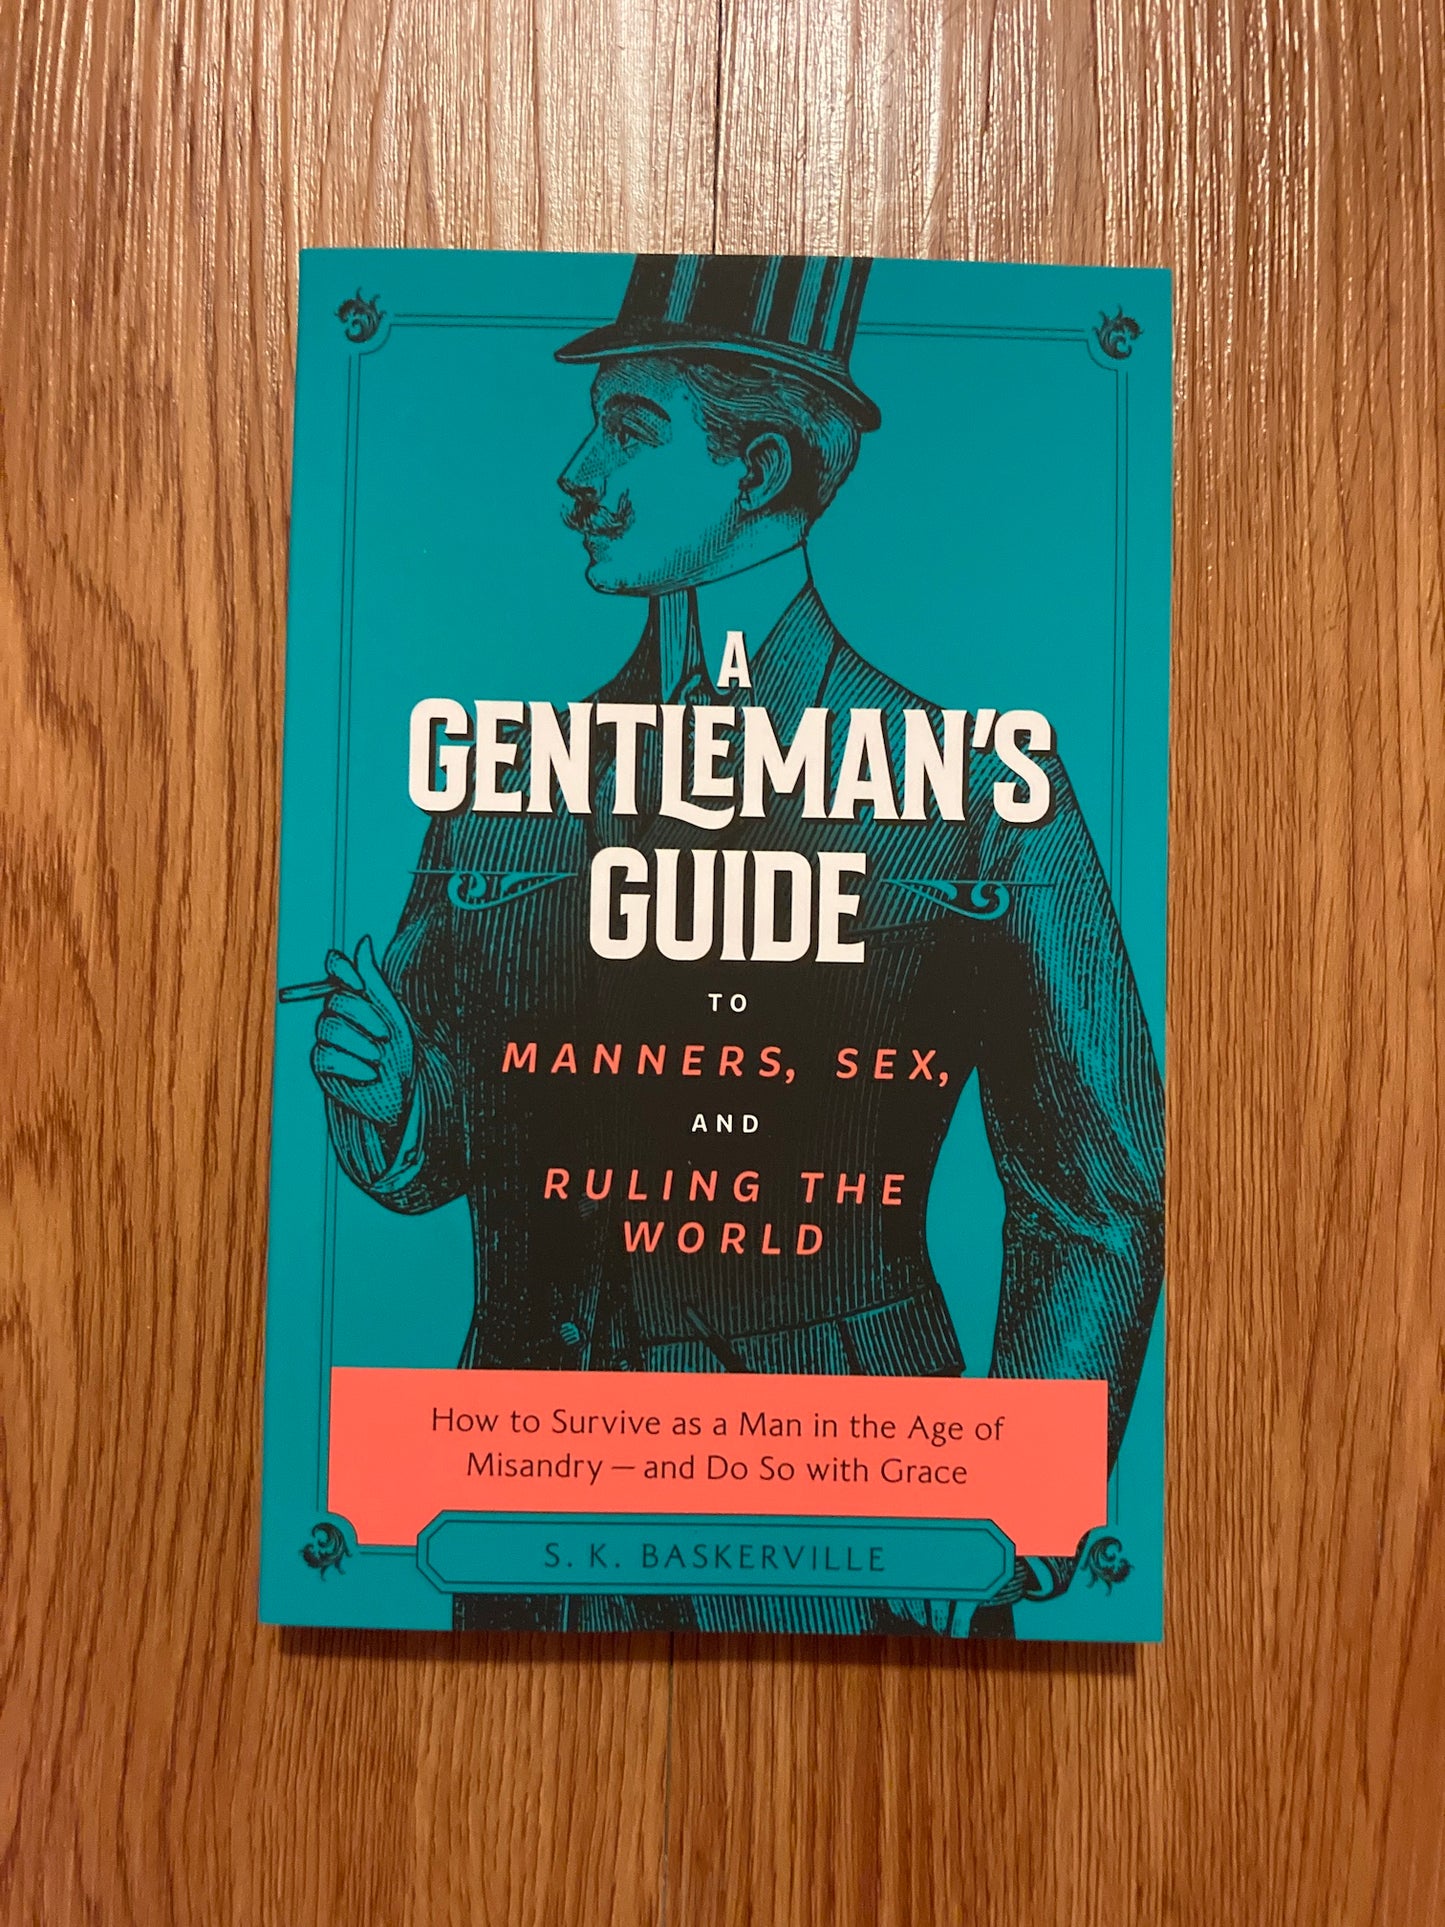 A Gentleman's Guide to Sex, Manners, and Ruling the World